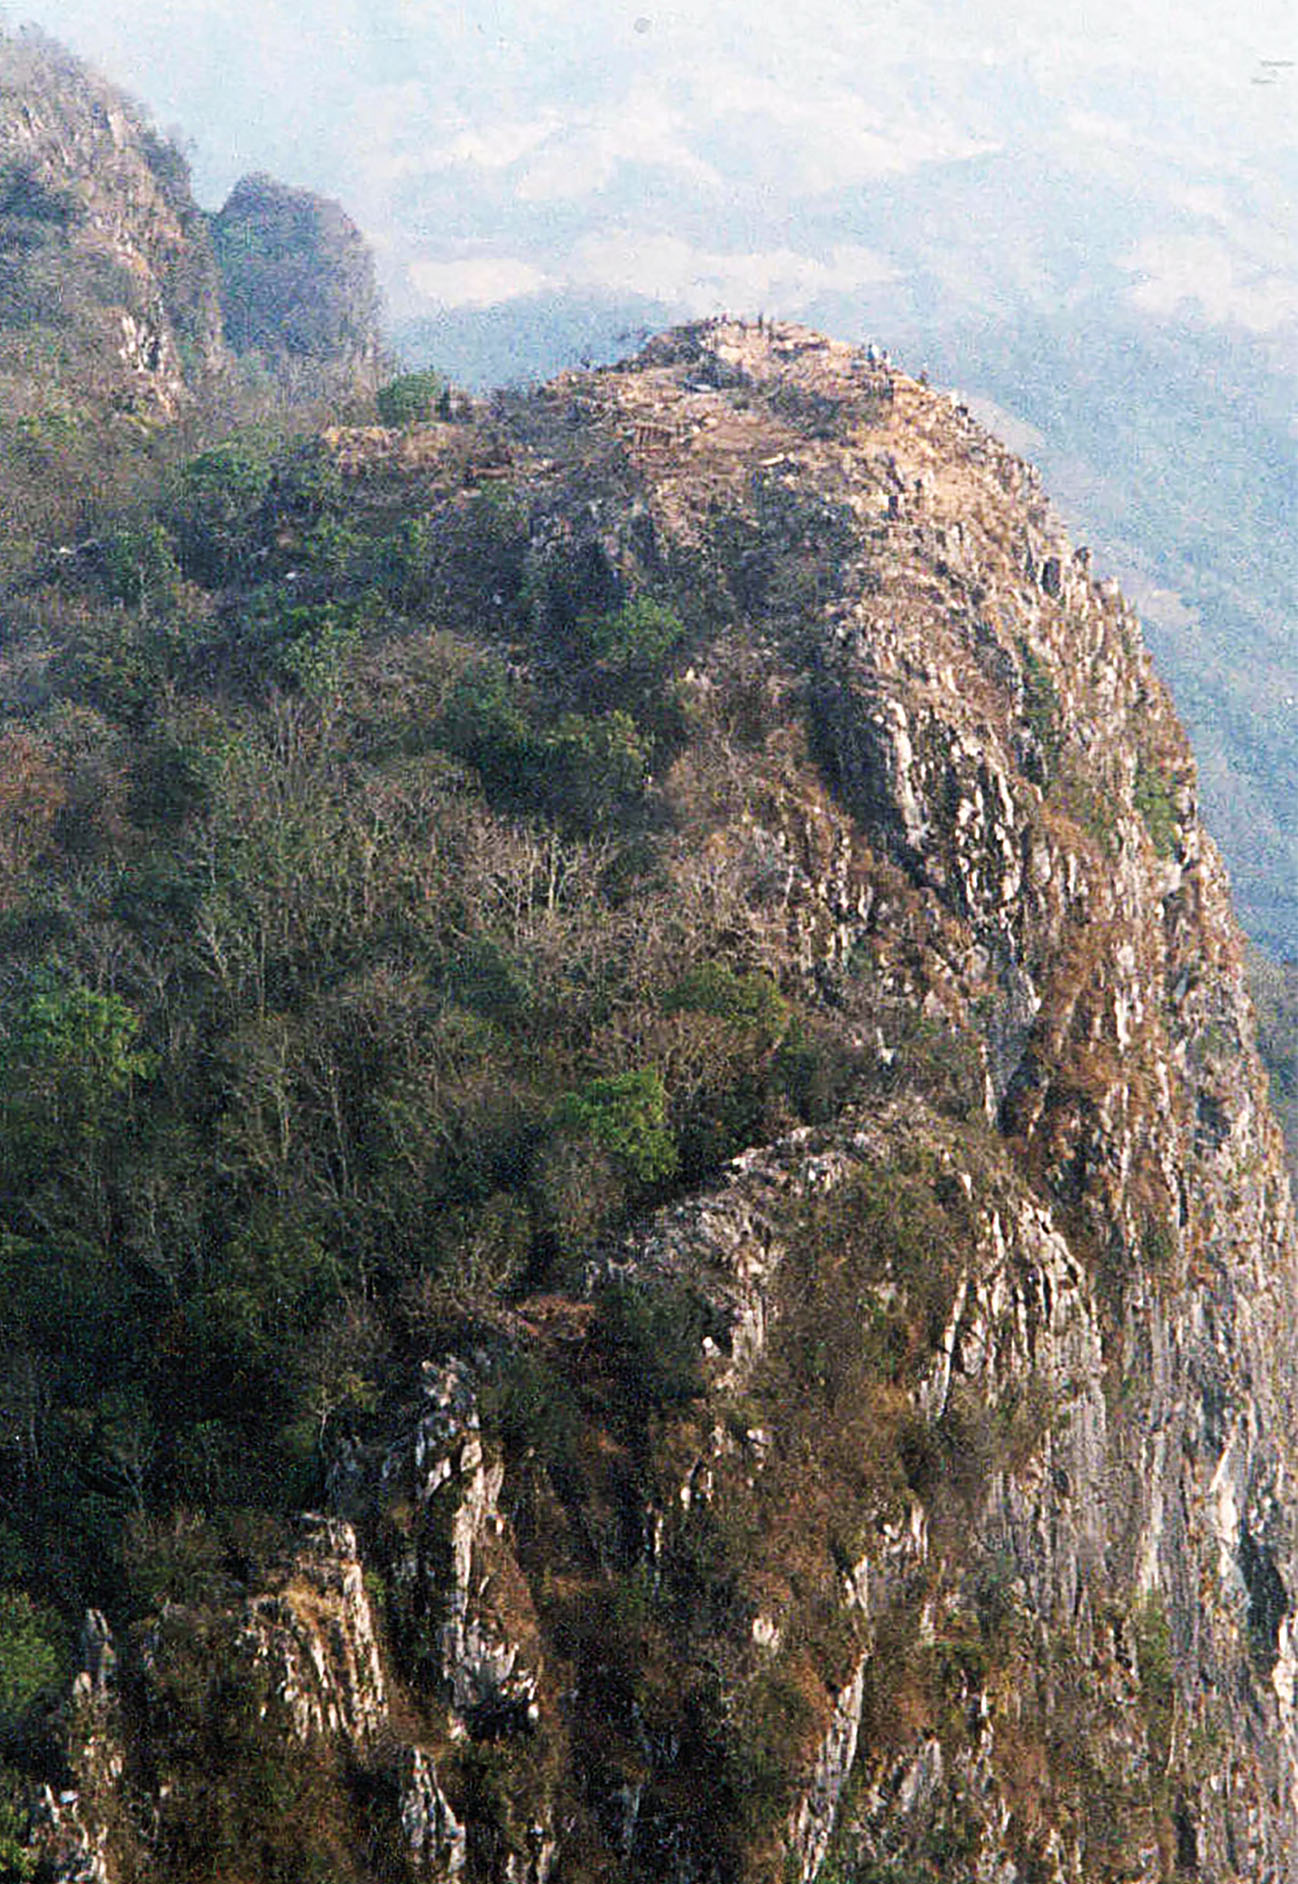 Phou Pha Thi, the location of Lima Site 85